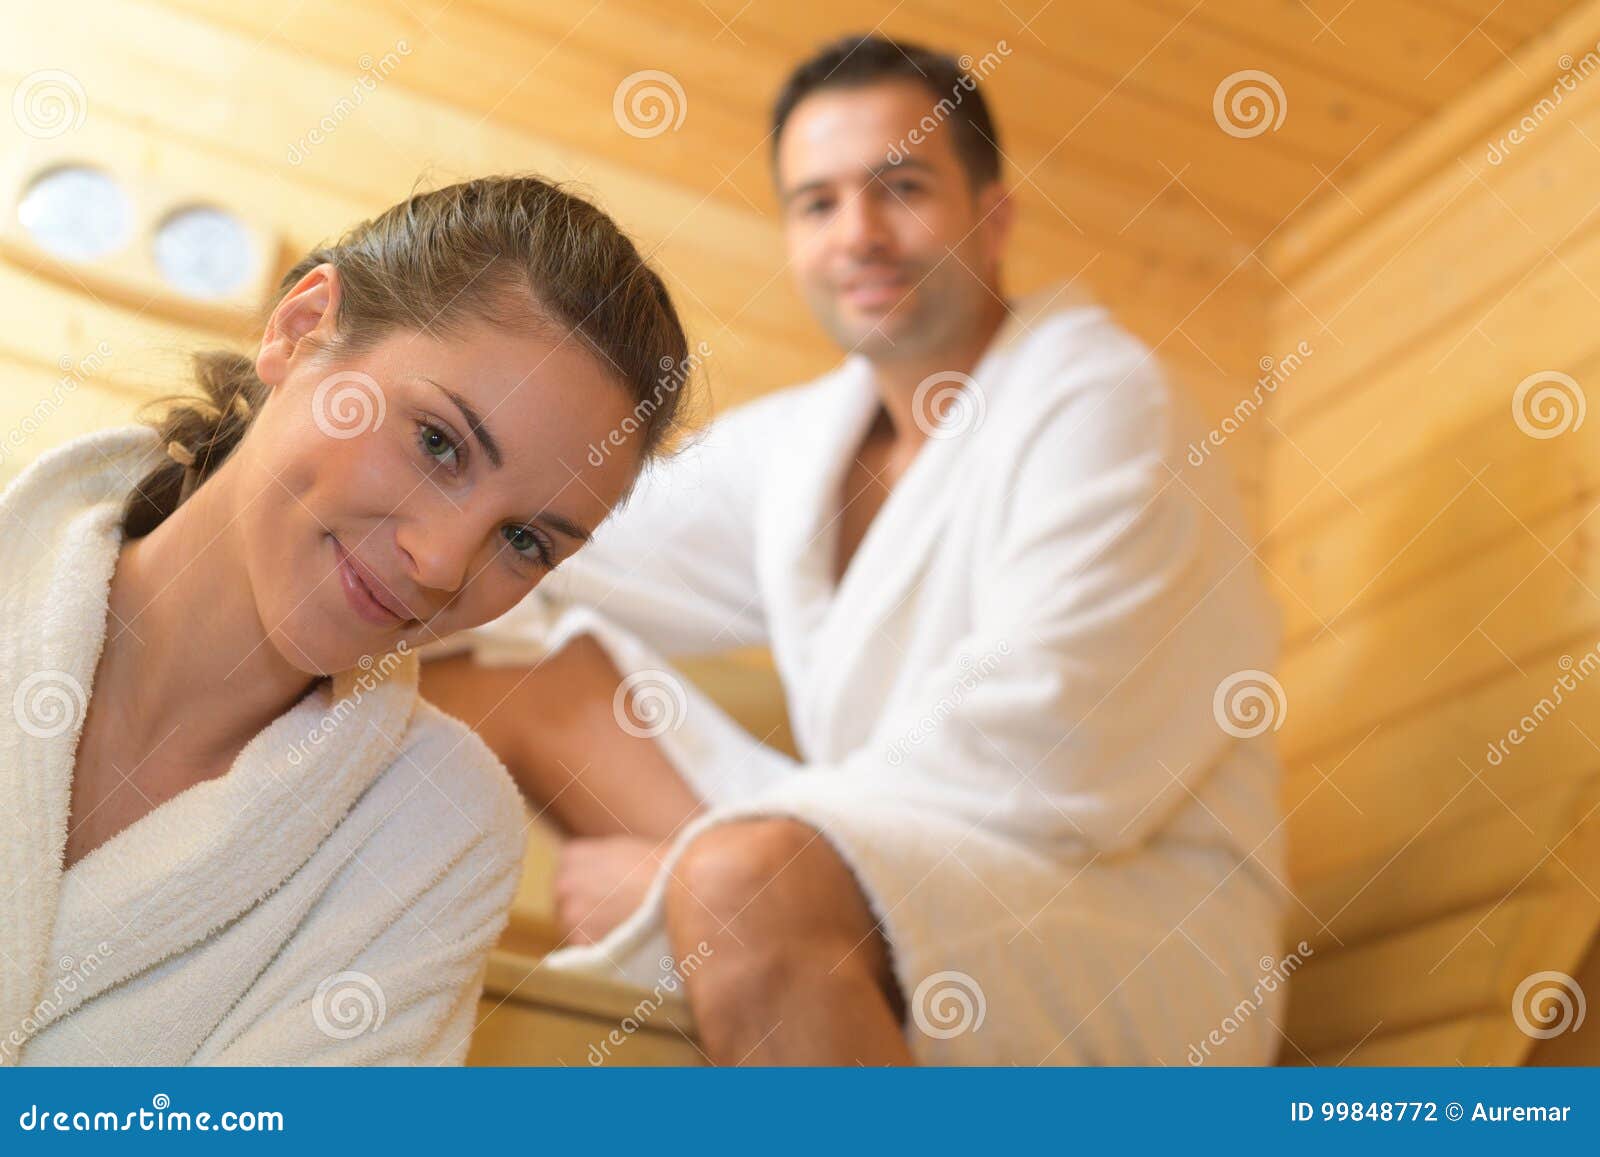 Man and woman in steam bath with towels smiling - Foto de stock